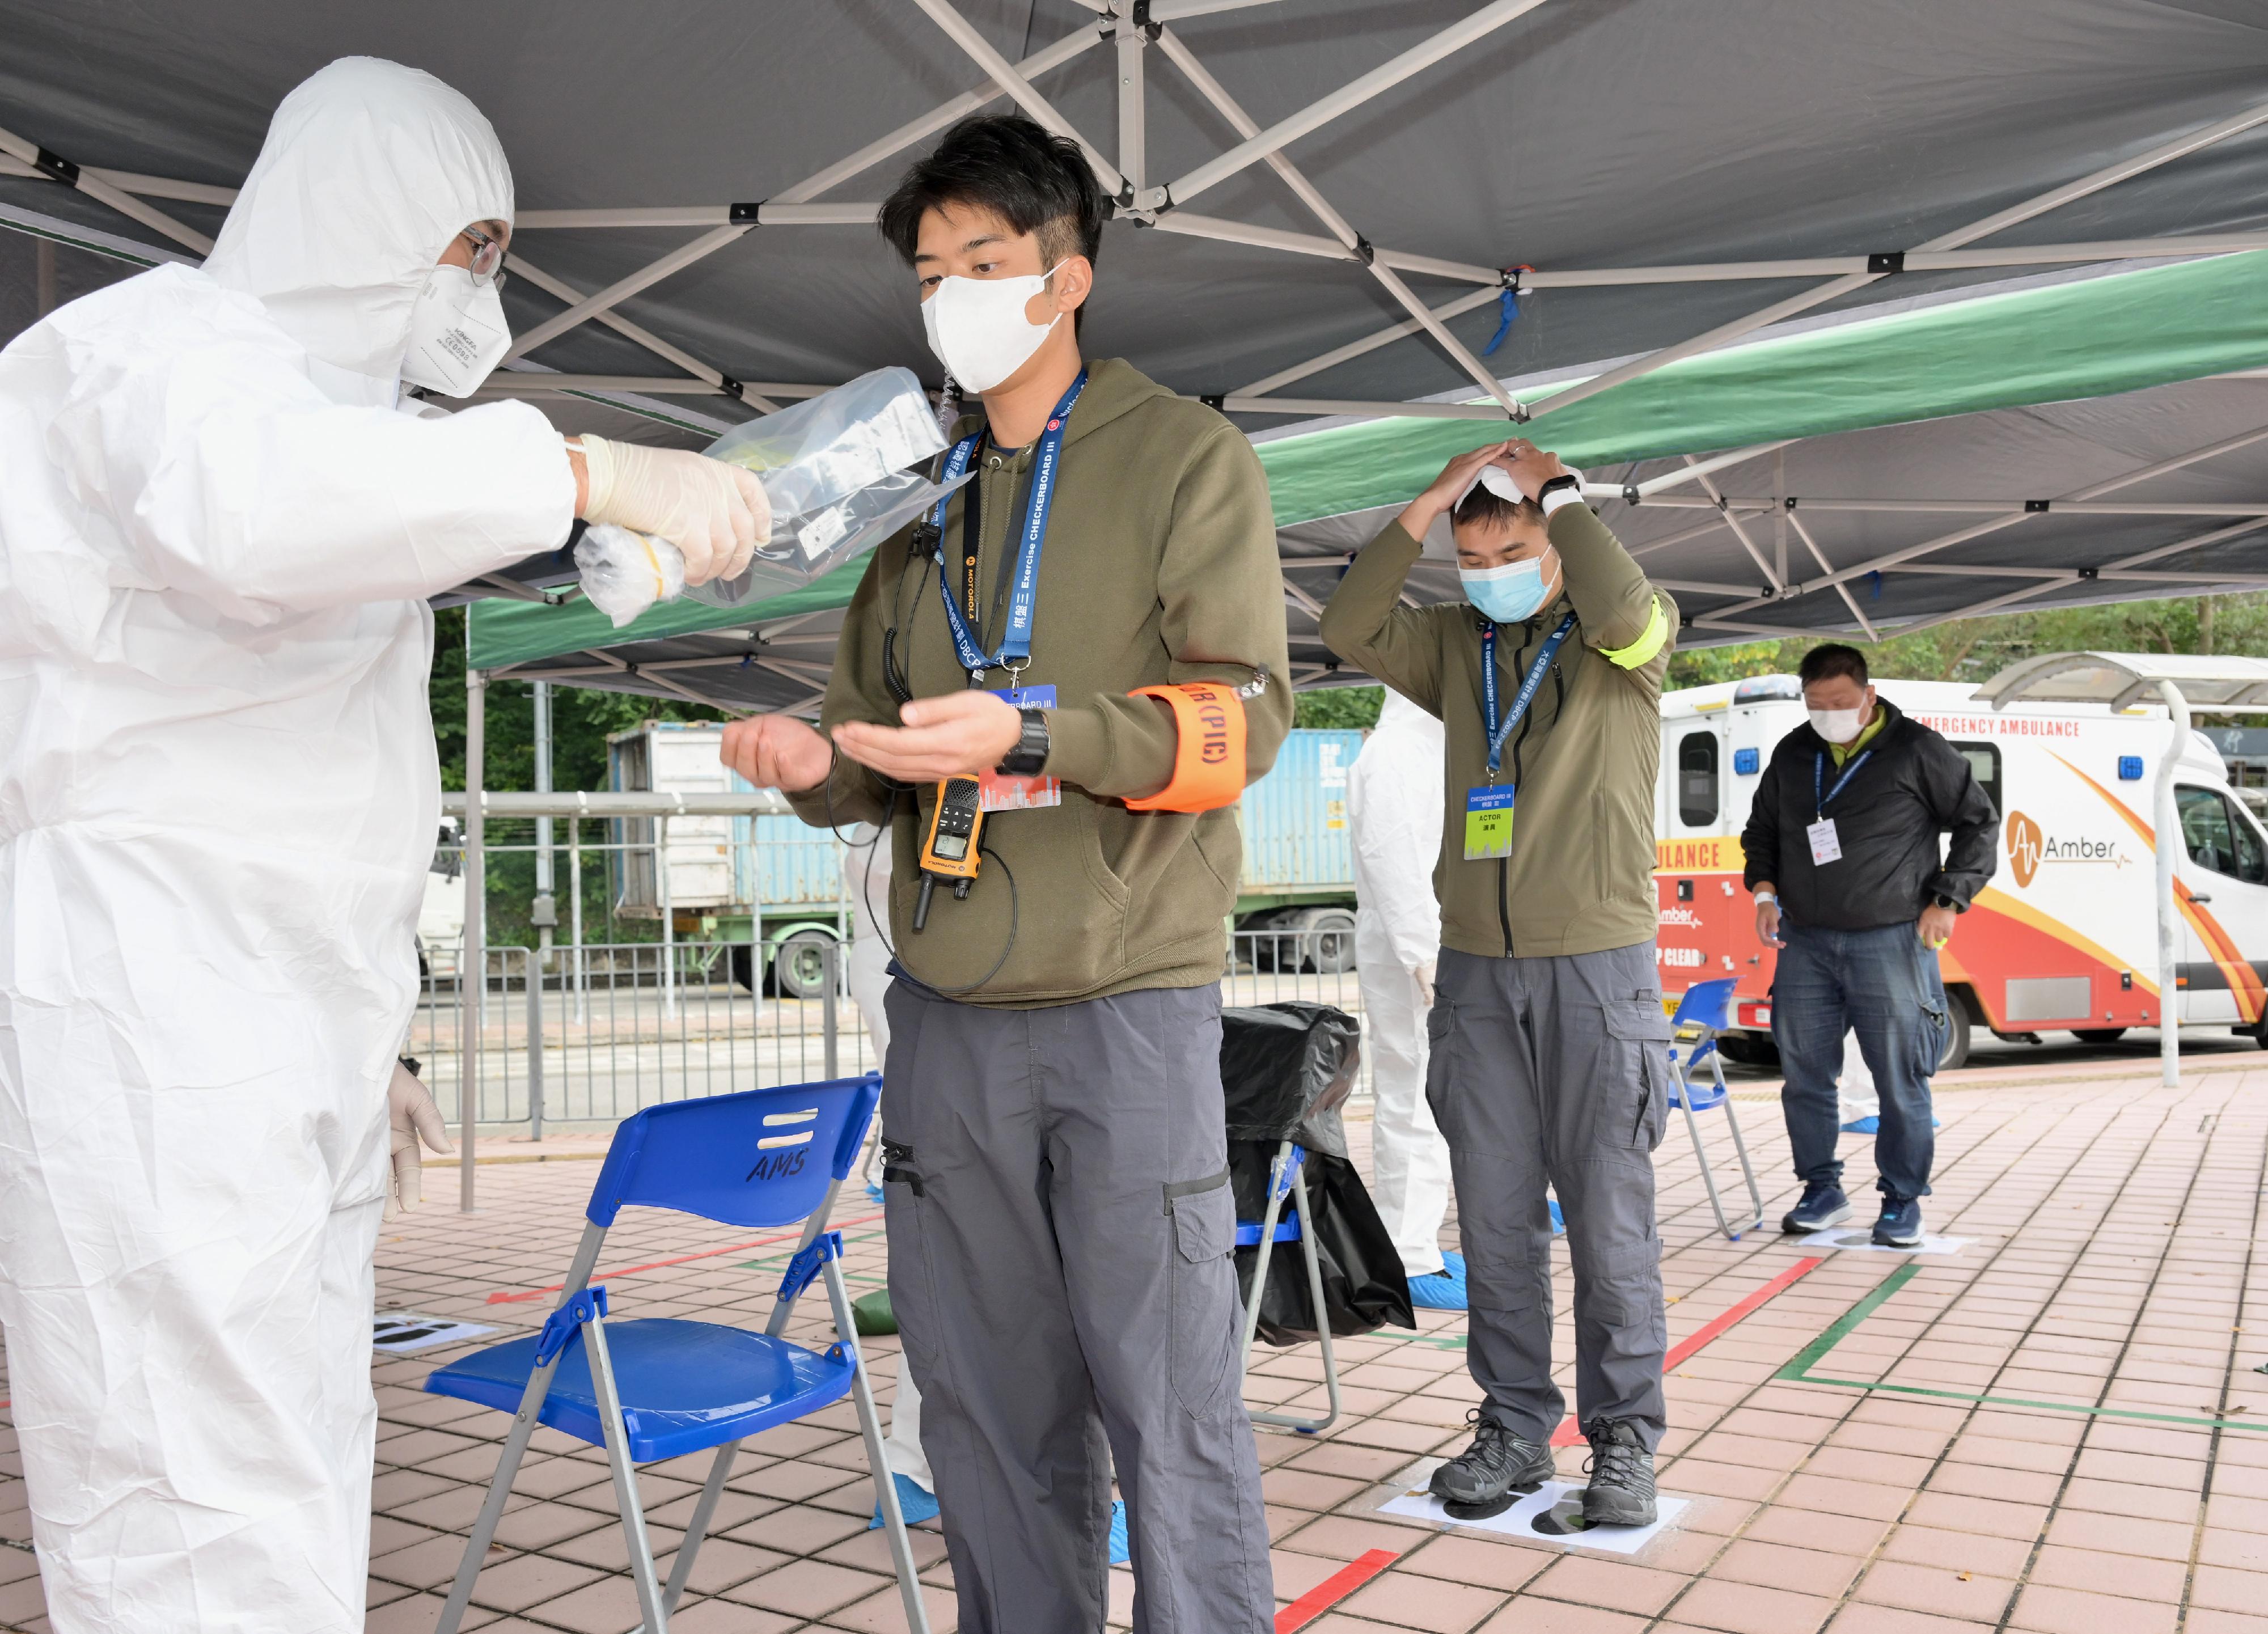 The Government conducted an inter-departmental exercise, "Checkerboard III", today (January 12). Photo shows staff members of the Auxiliary Medical Service simulating radiation monitoring on people arriving from the Mainland at Man Kam To Control Point.